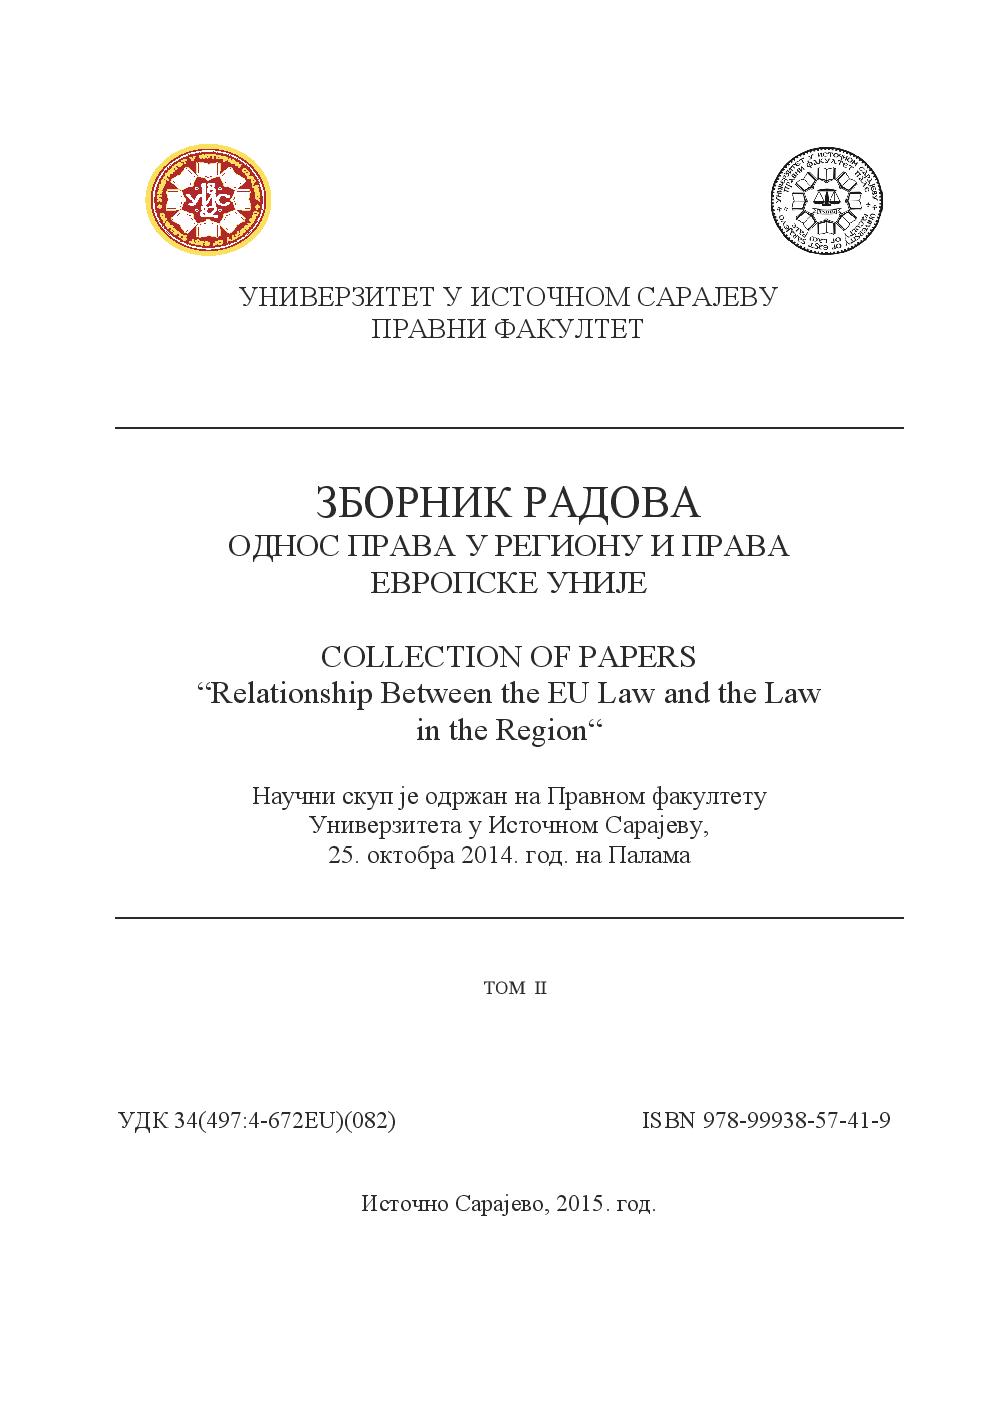 Legal Status of the Auditing Companies. Harmonization of regulations of the Republic of Serbia and the Republic of Srpska with law of the European Union Cover Image